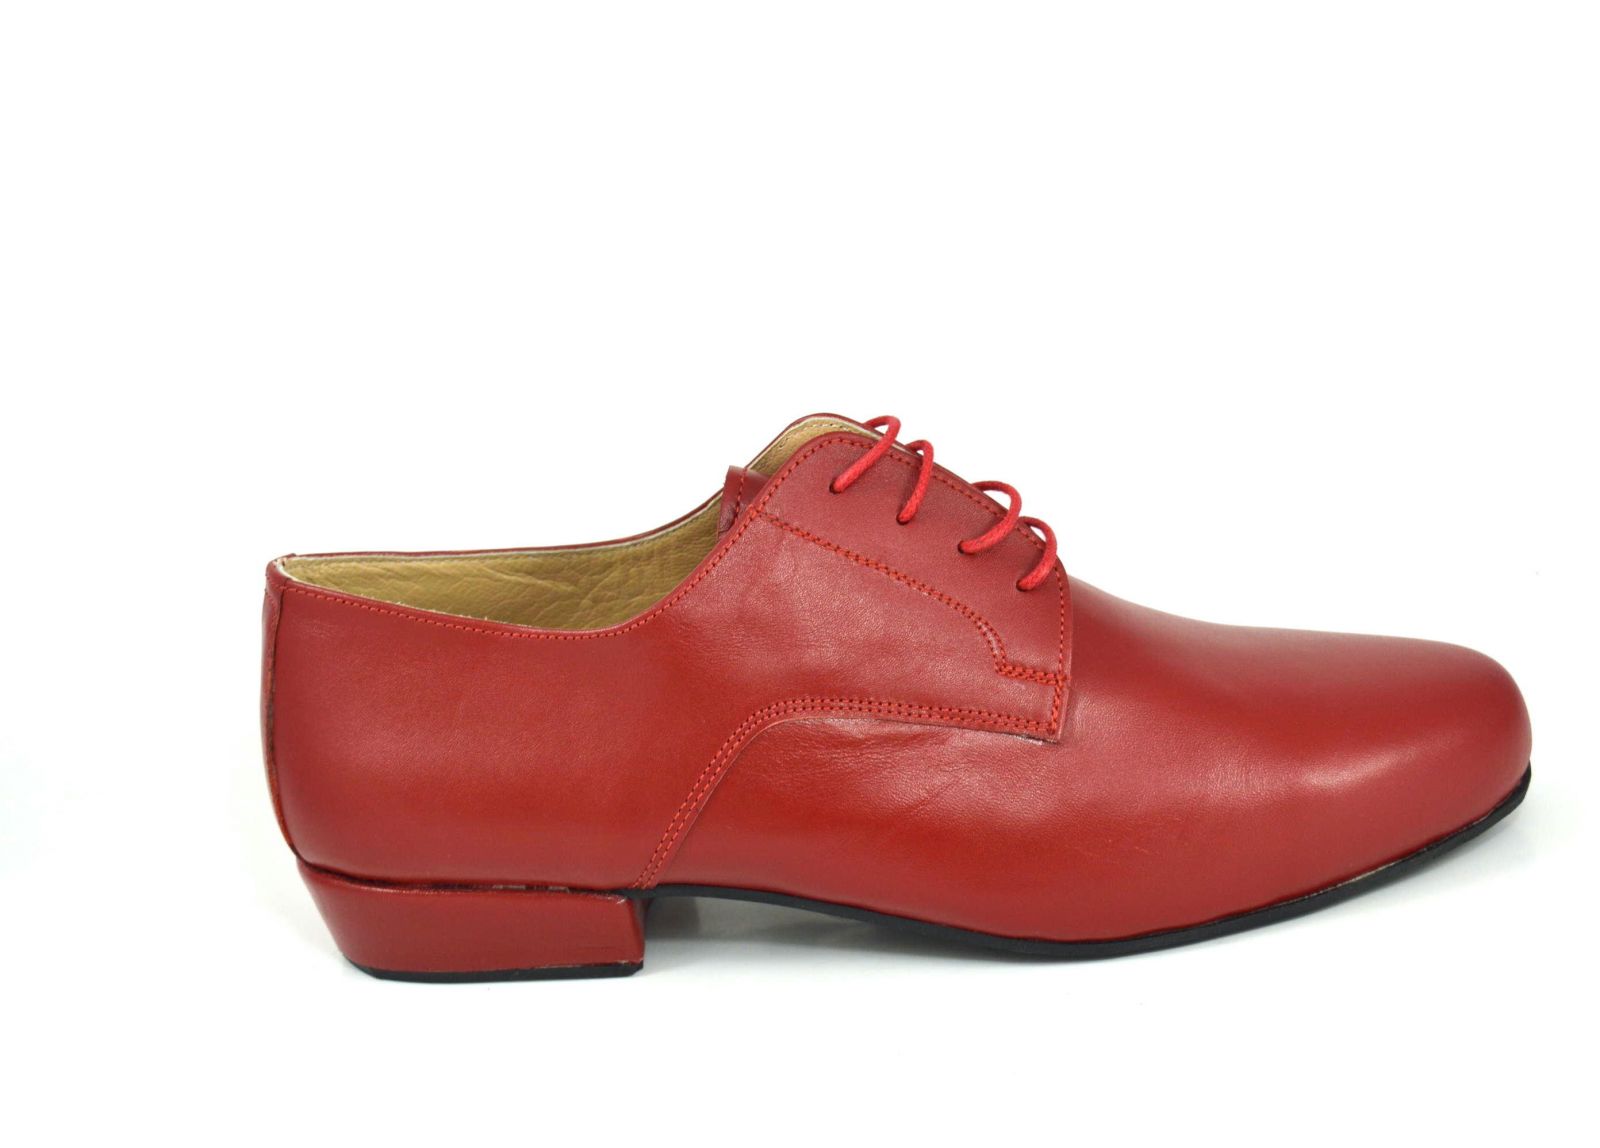 Mens argentine tango dance shoes in burgundy leather